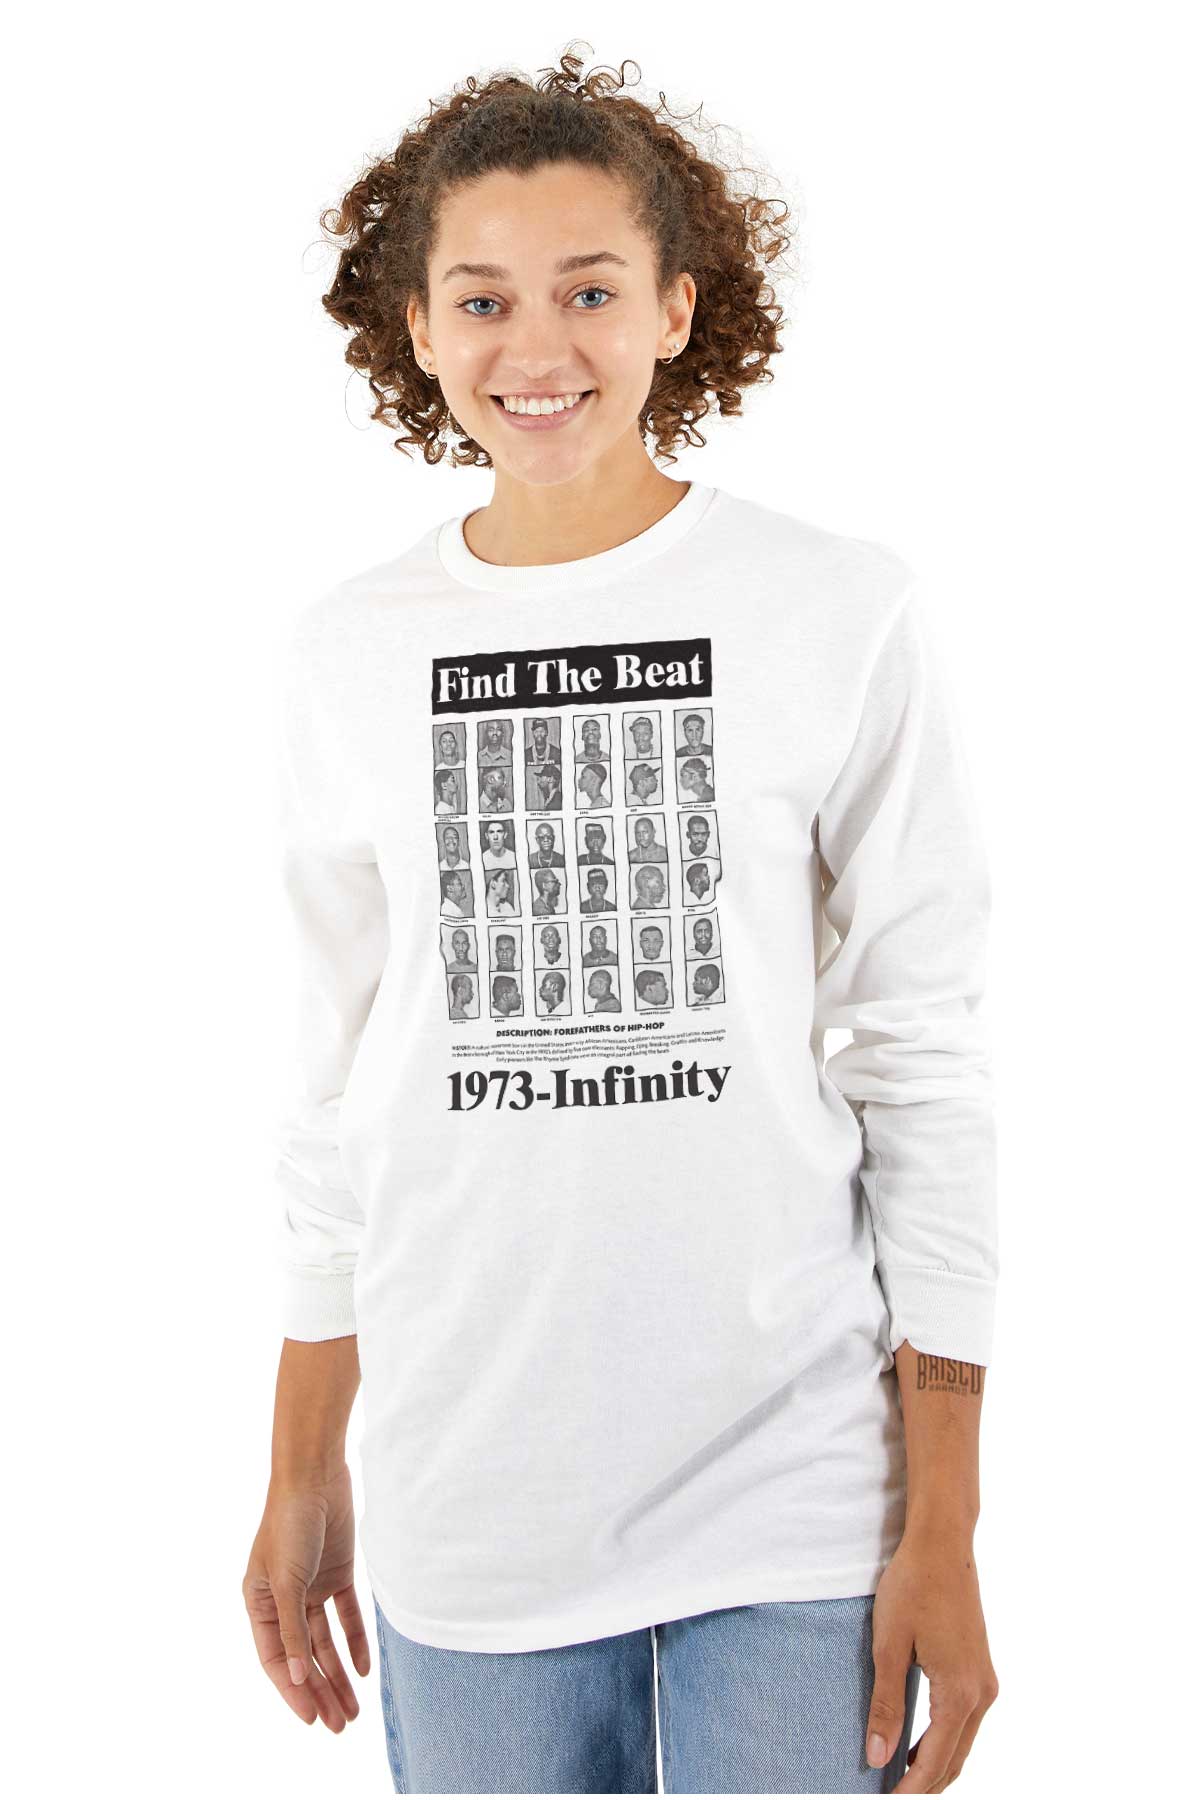 Immerse yourself in the genuine hip-hop culture and honor its rich history by wearing this stylish garment, keeping the spirit of hip-hop alive with the images of different legendary hip-hop artists.